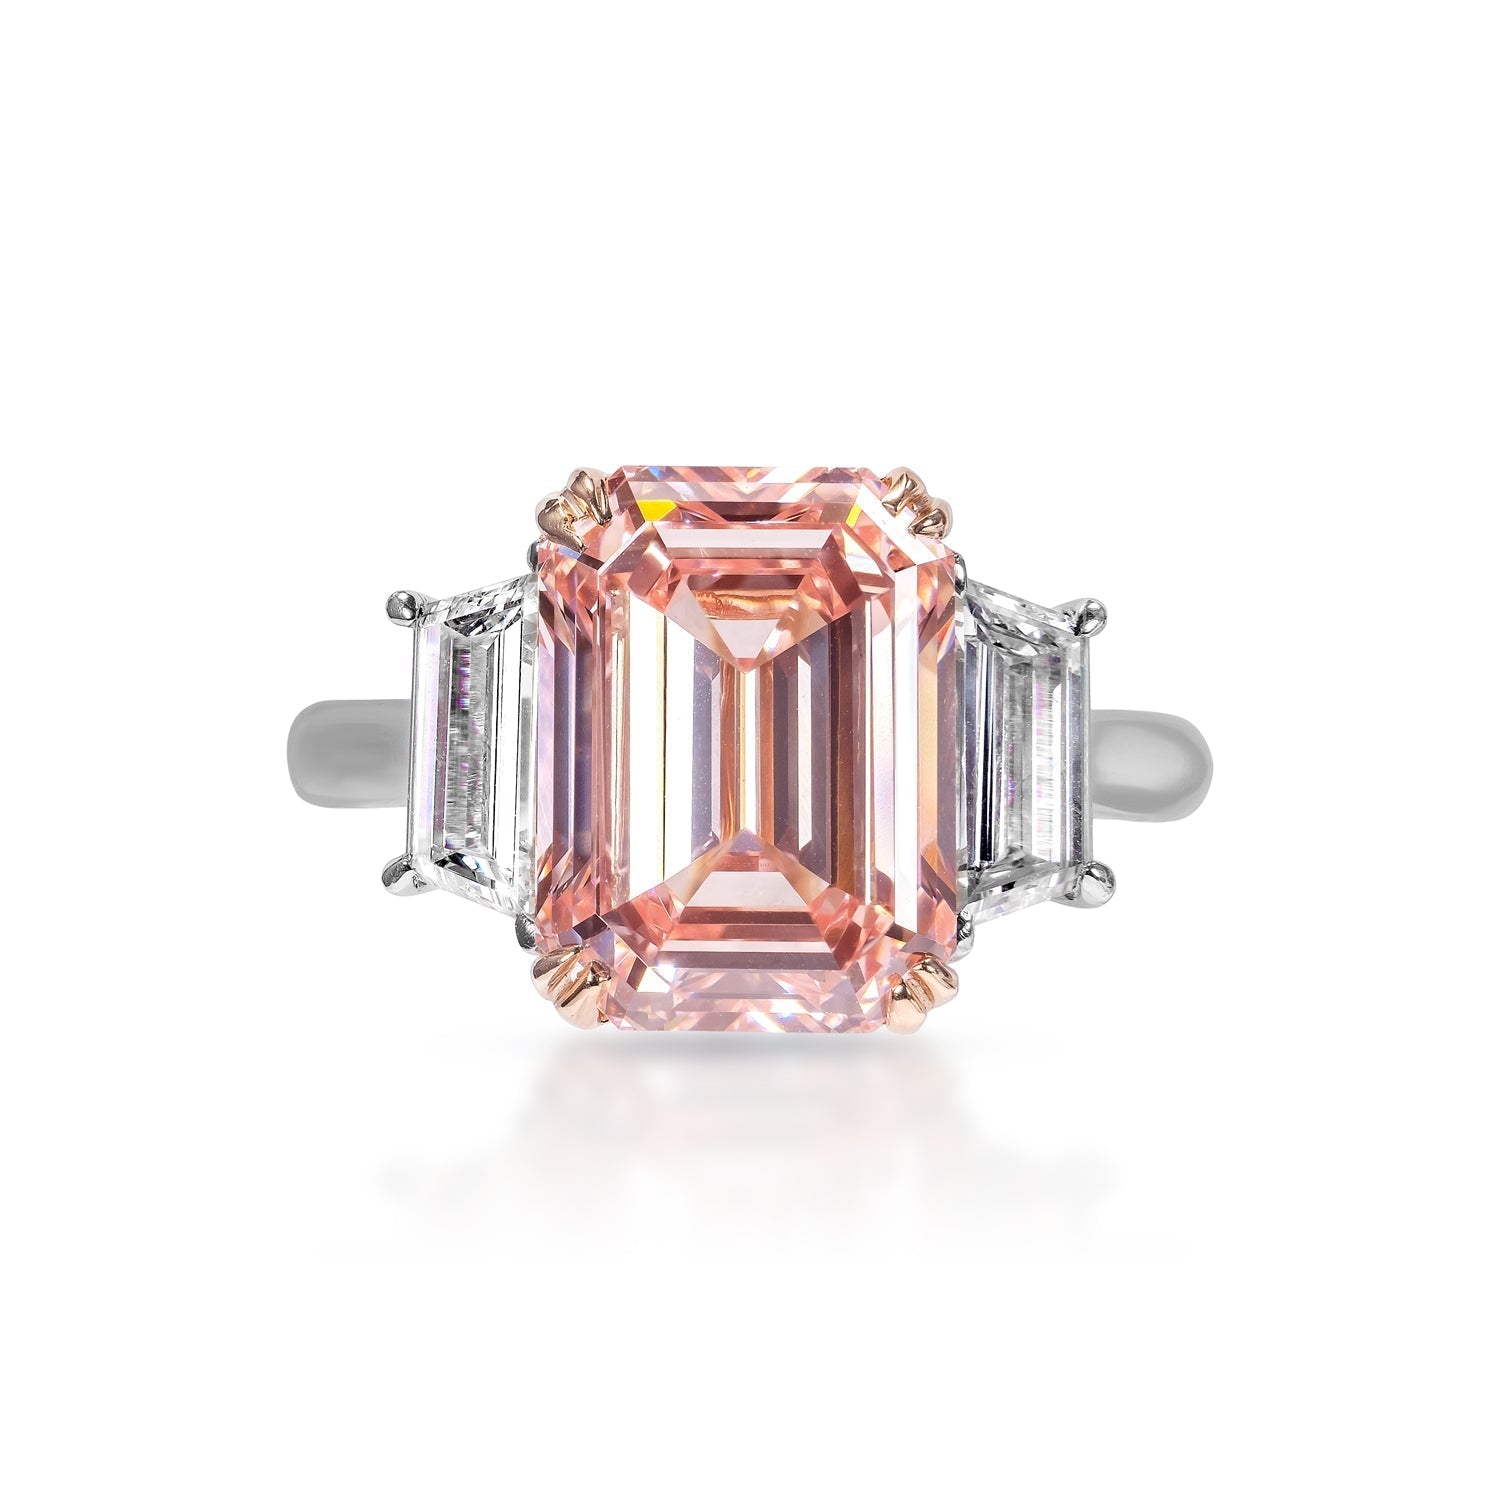 Gloria 7 Carats Fancy Vivid Pink VVS1 Emerald Cut Diamond Engagement Ring in 18k White Gold. GIA Certified Front View